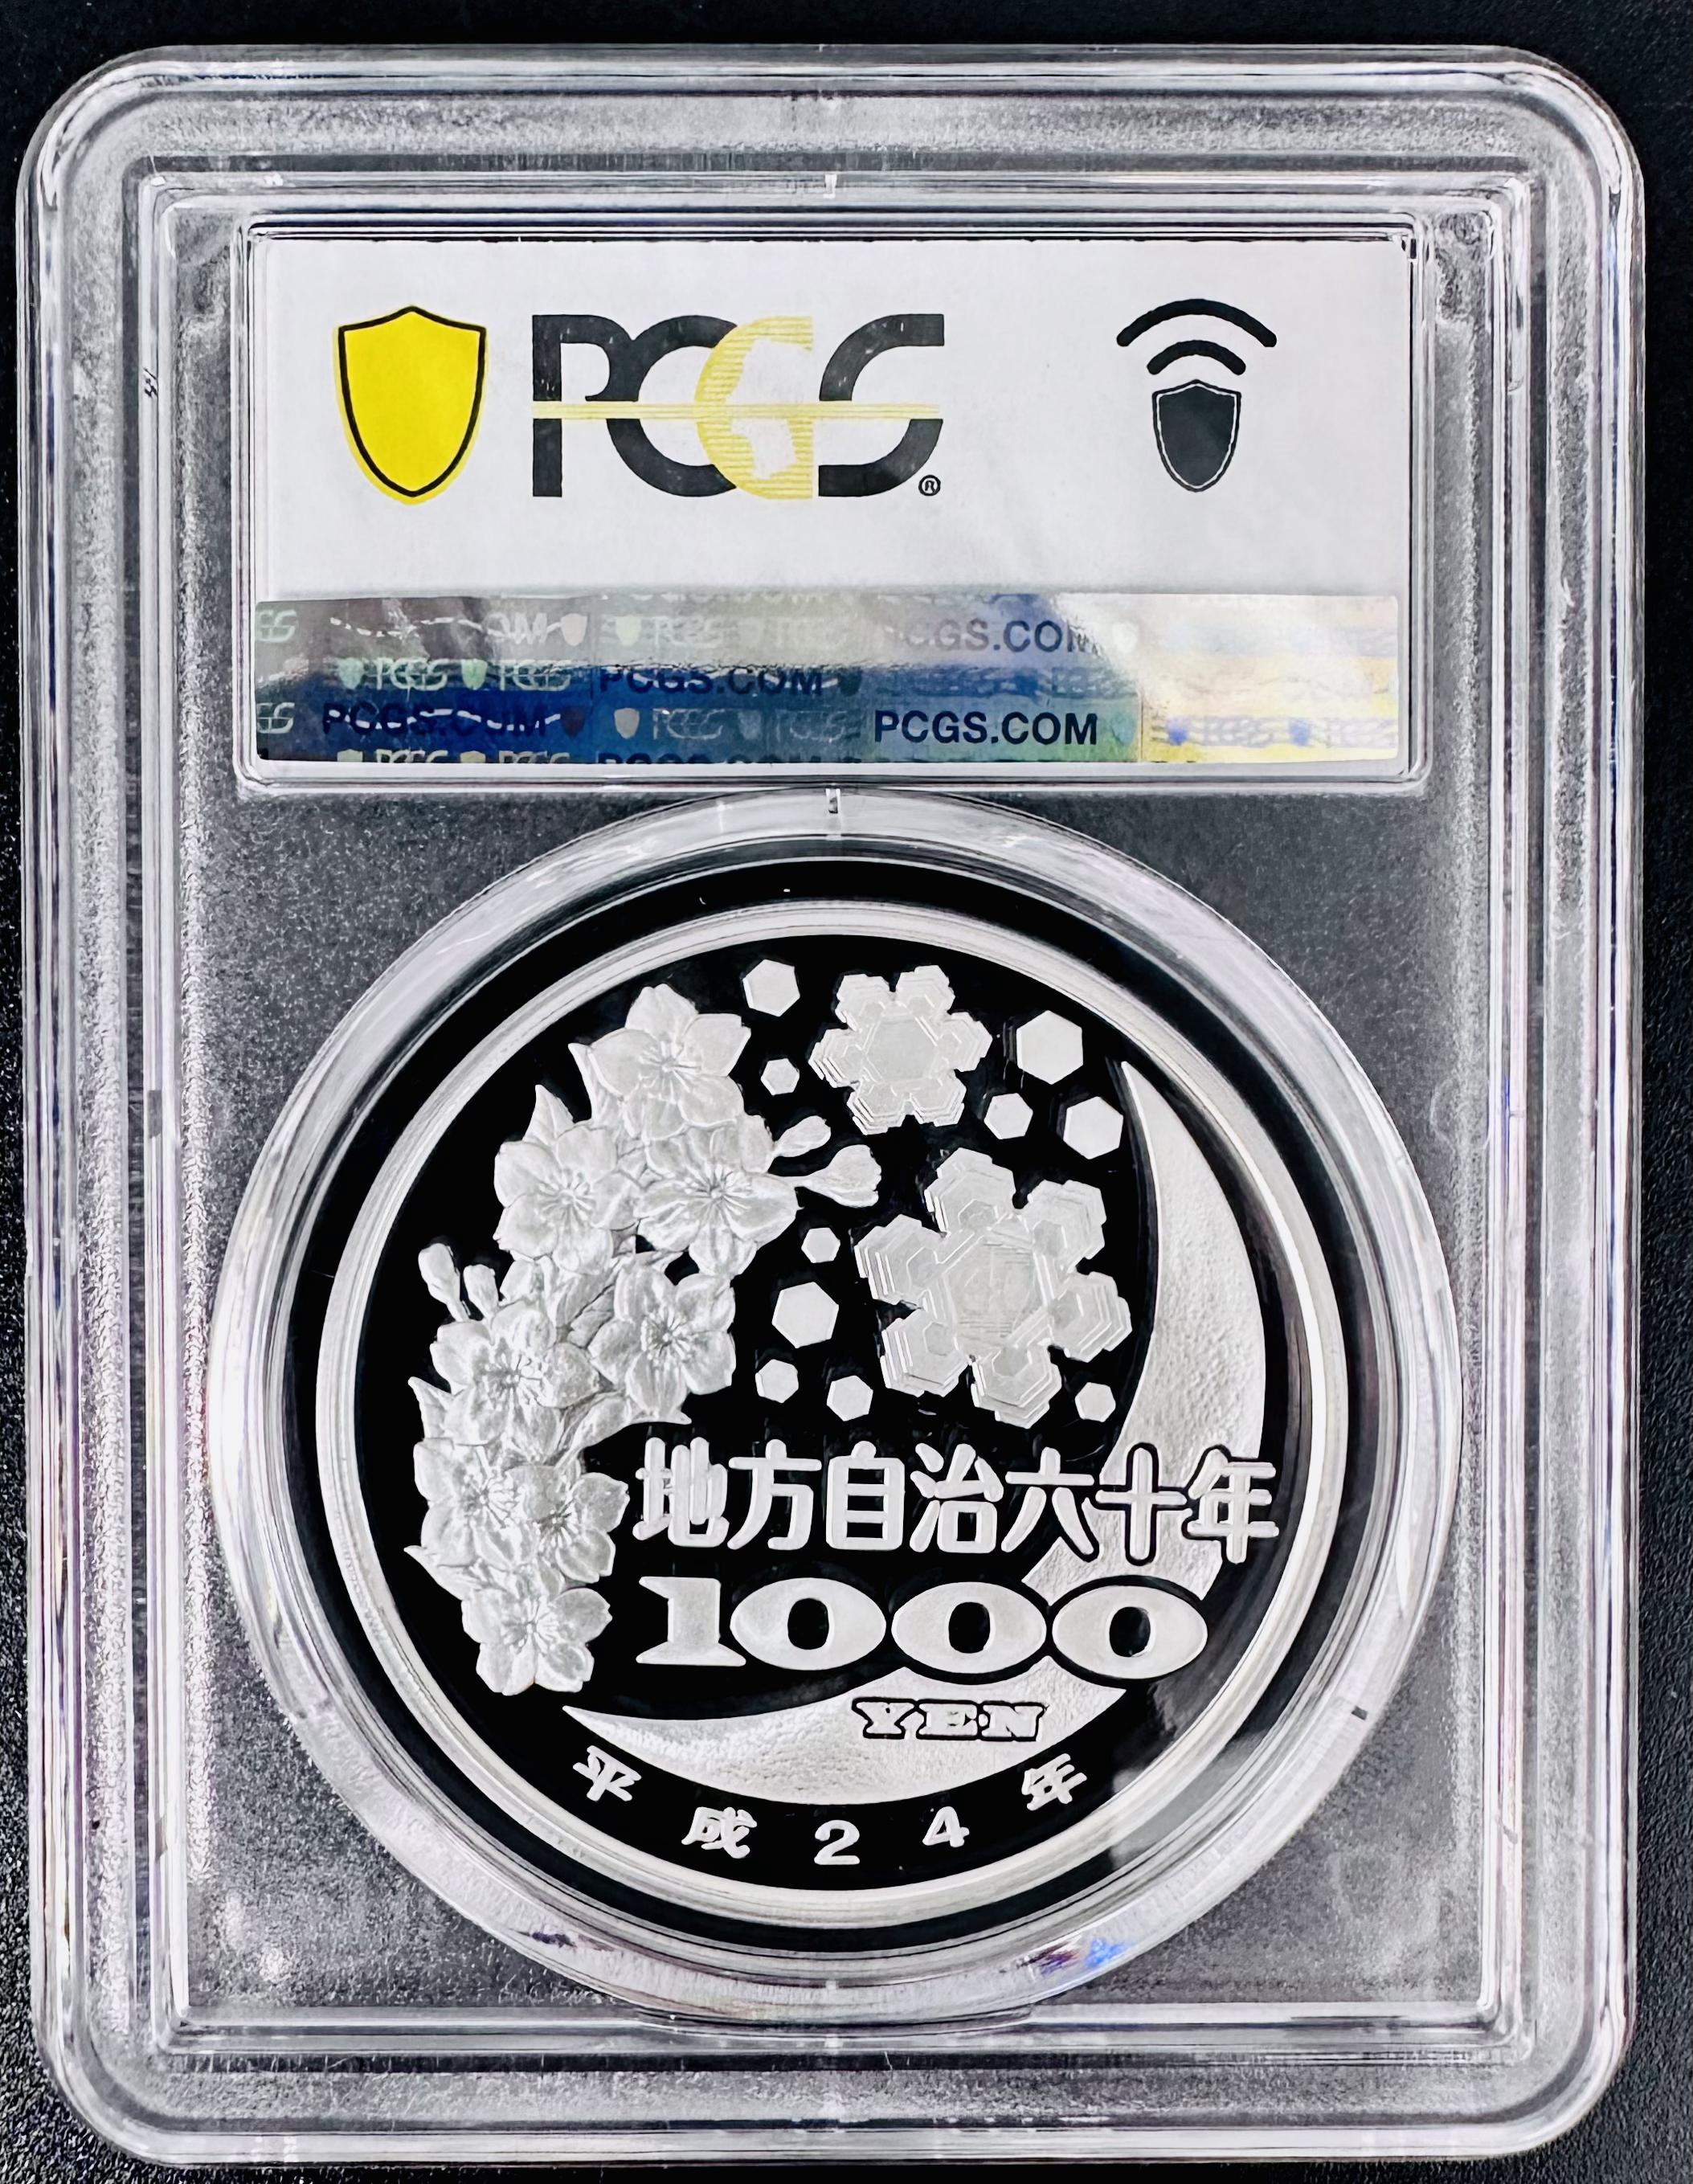 PCGS local government law . line 60 anniversary commemoration thousand jpy silver coin . proof money set Kanagawa prefecture local government thousand jpy silver coin 1000 jpy silver coin 